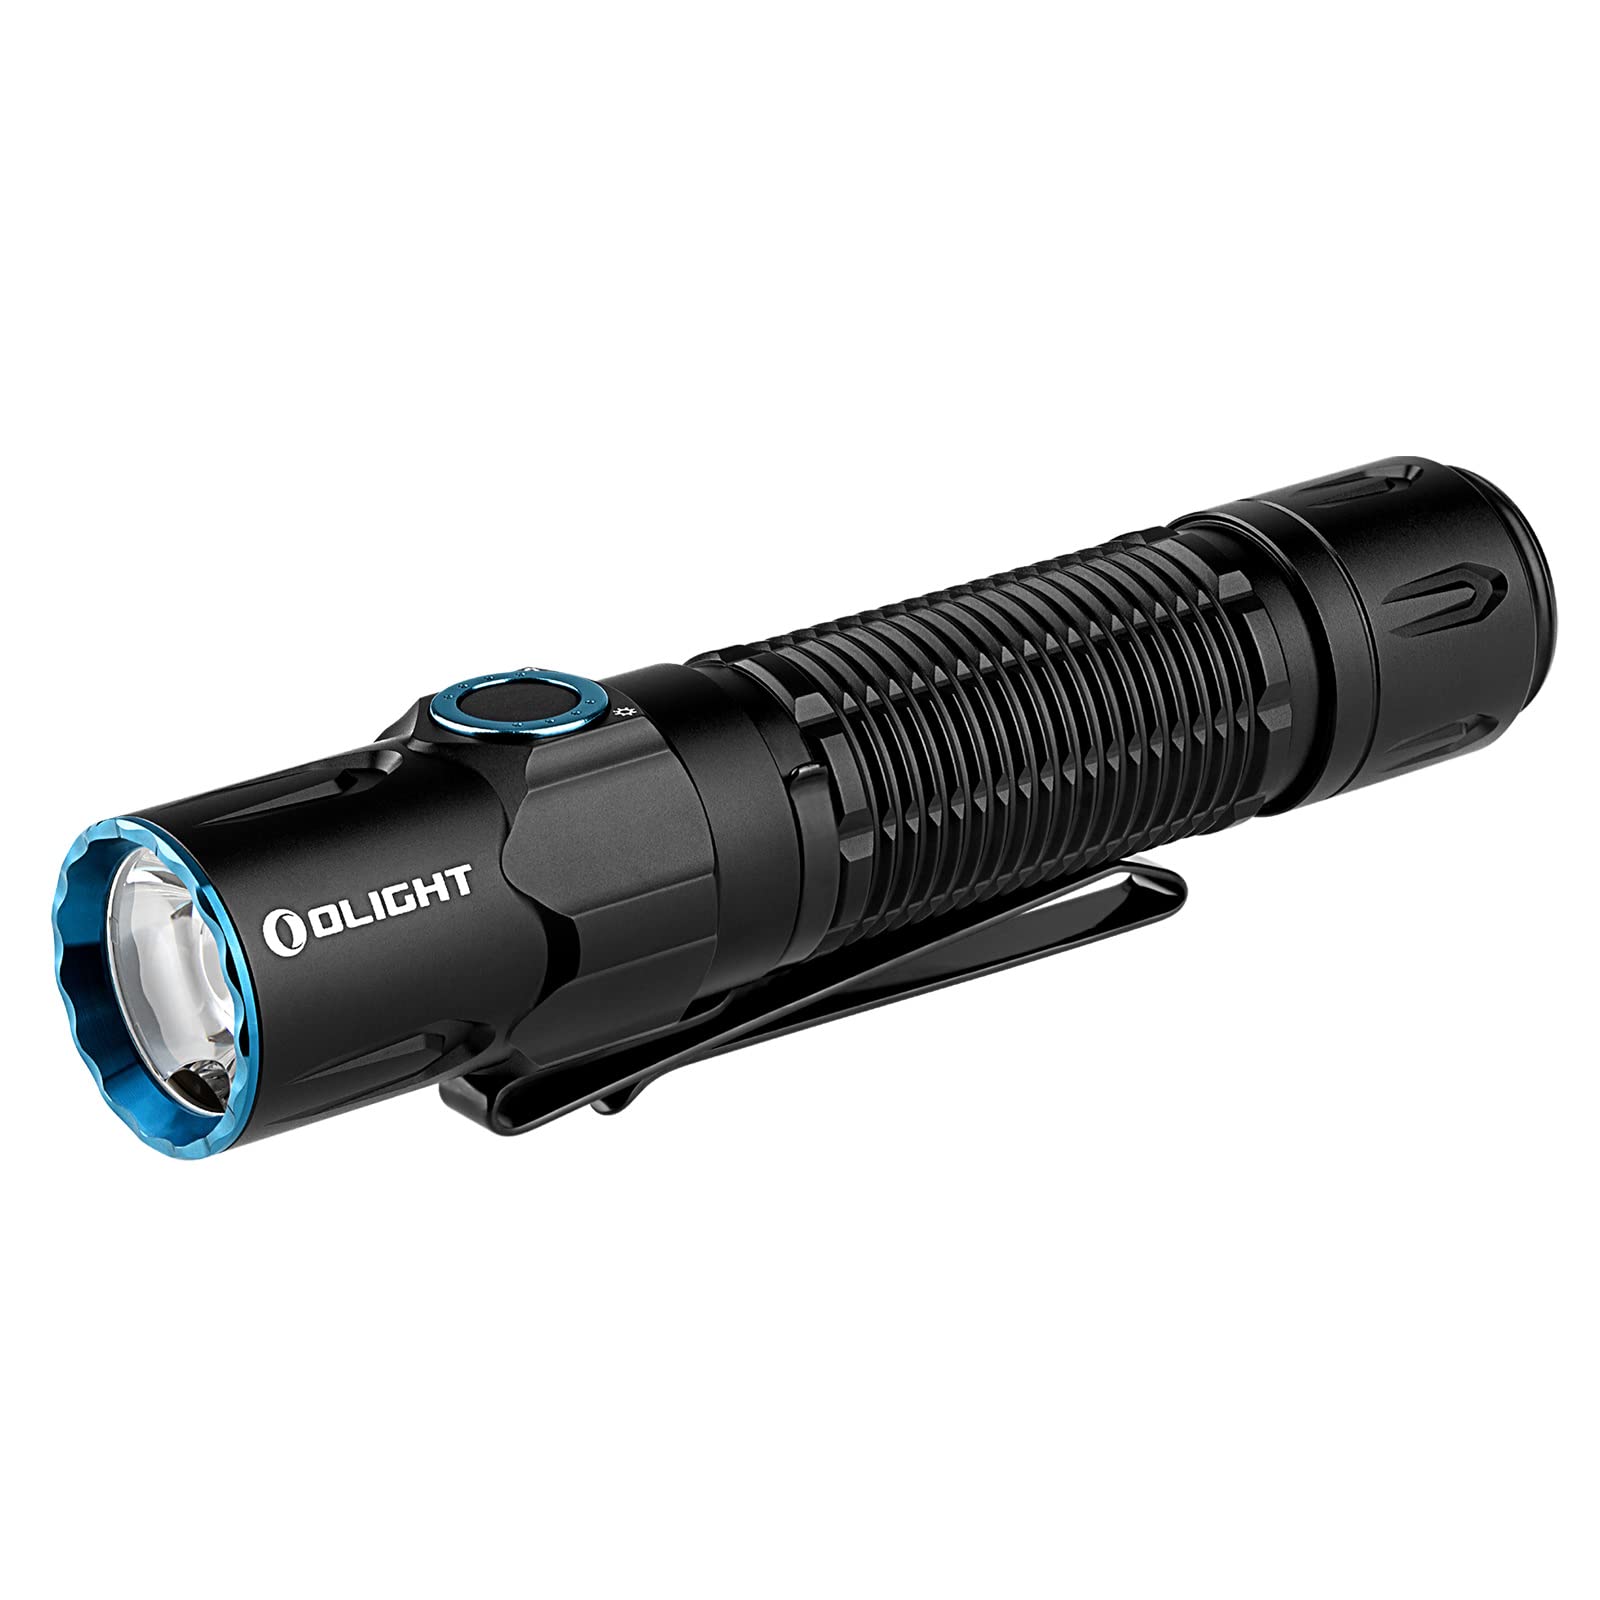 Olight Warrior 3S 2300 Lumens Rechargeable Tactical Fla...